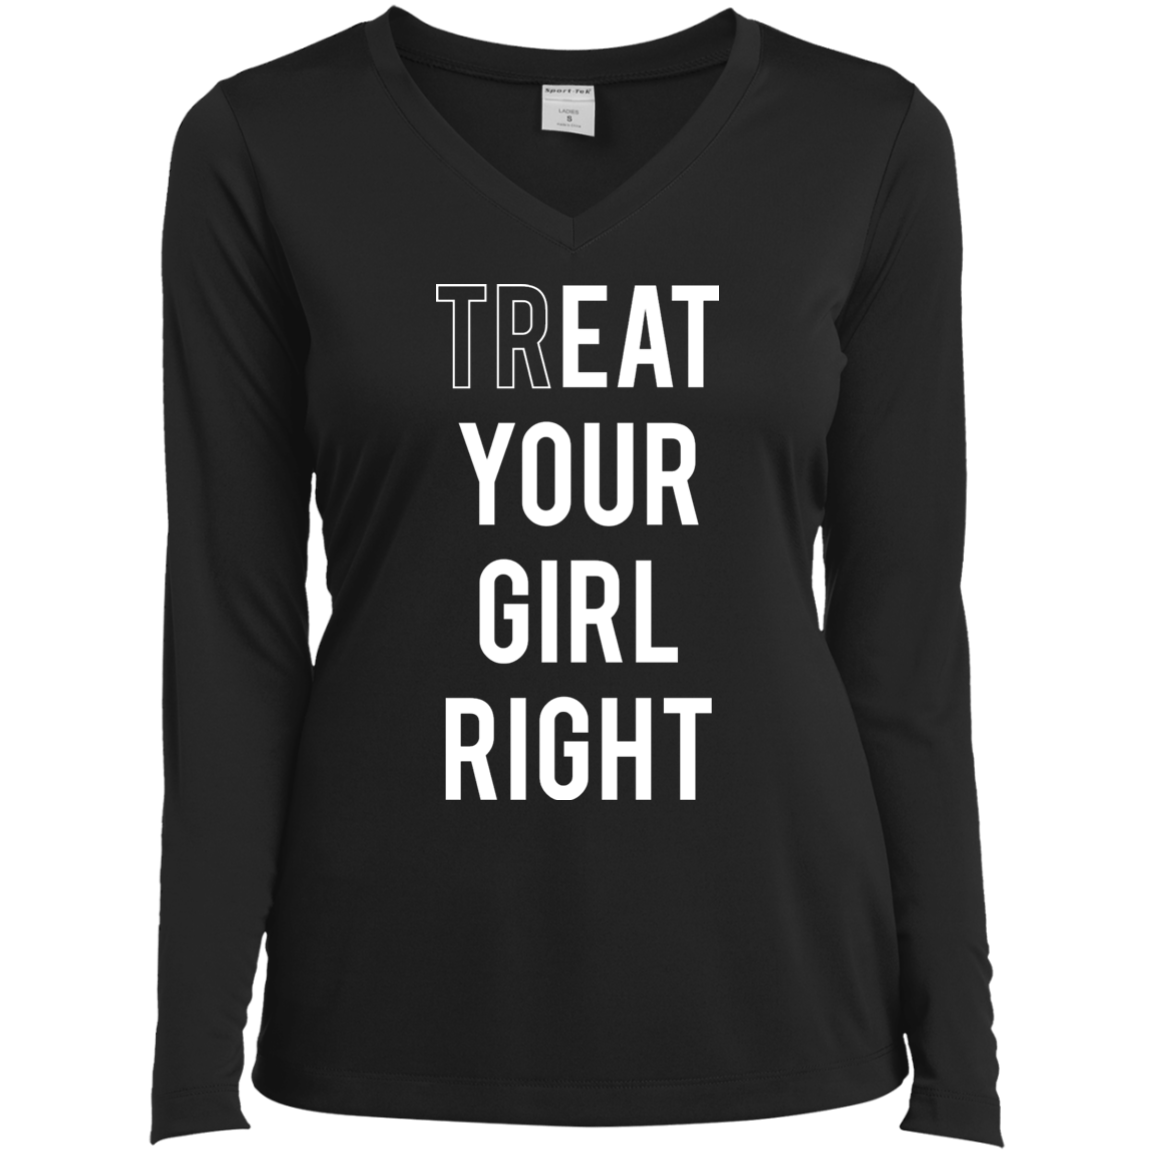 black full sleeves funny quoted tshirt for girls/women/lesbian